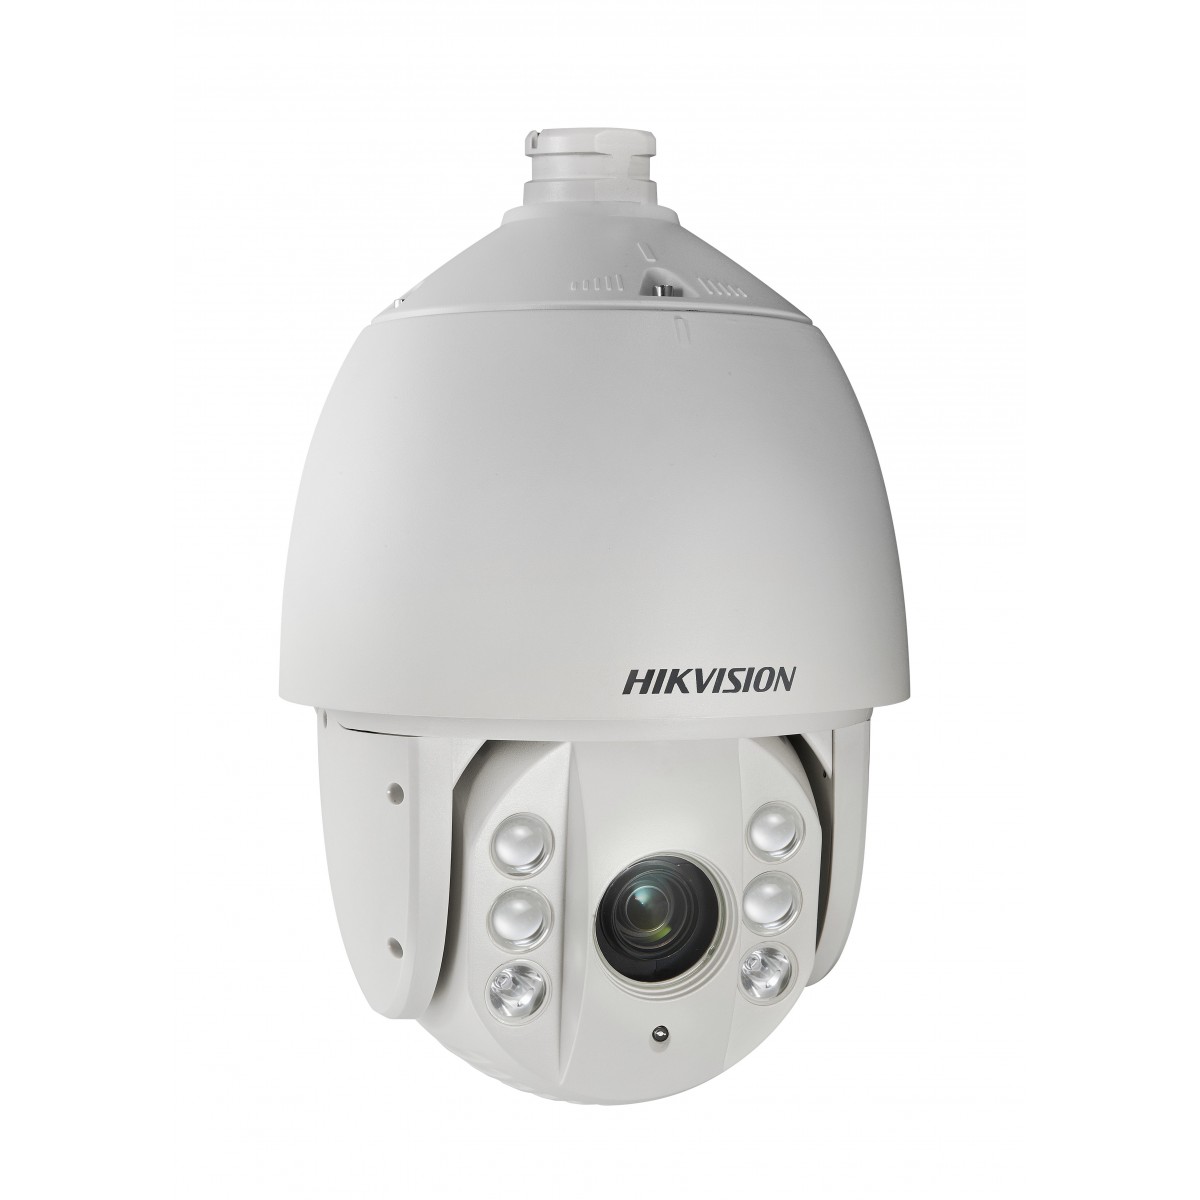 Hikvision DS-2AE7232TI-A (C) - CCTV security camera - Indoor  outdoor - Wired - 5 Pattern - Pelco-P-D - Dome